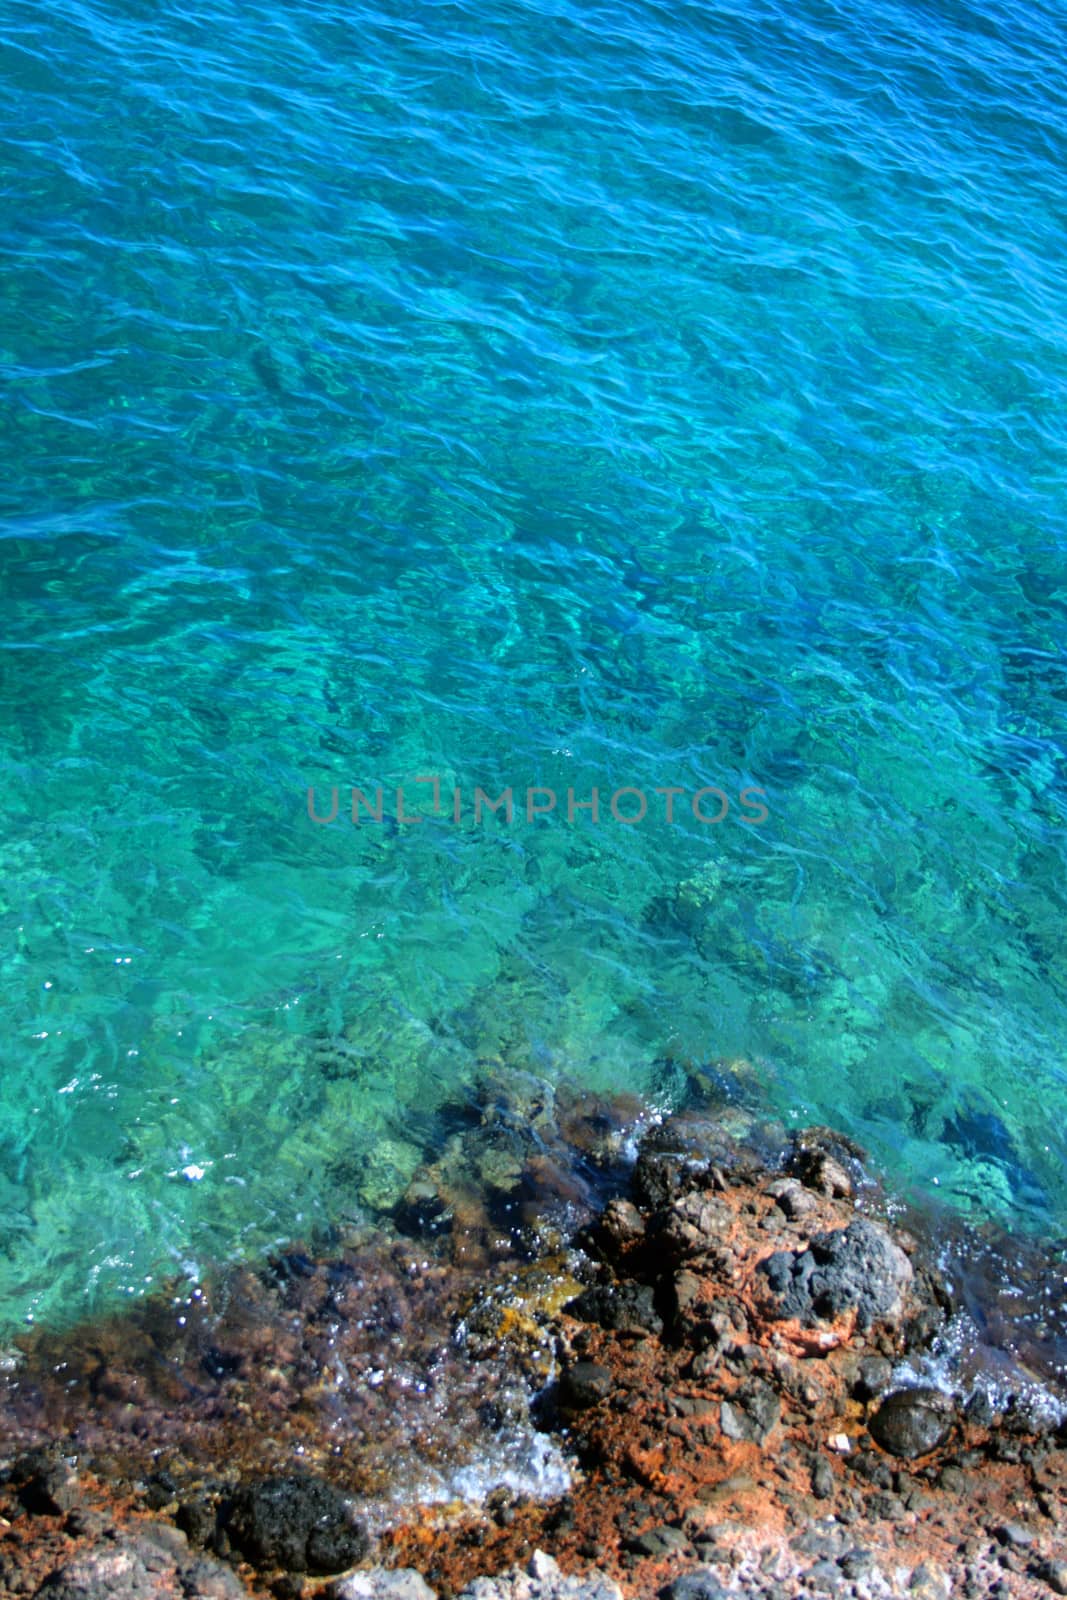 A rocky sea shore with beautiful blue clean water.